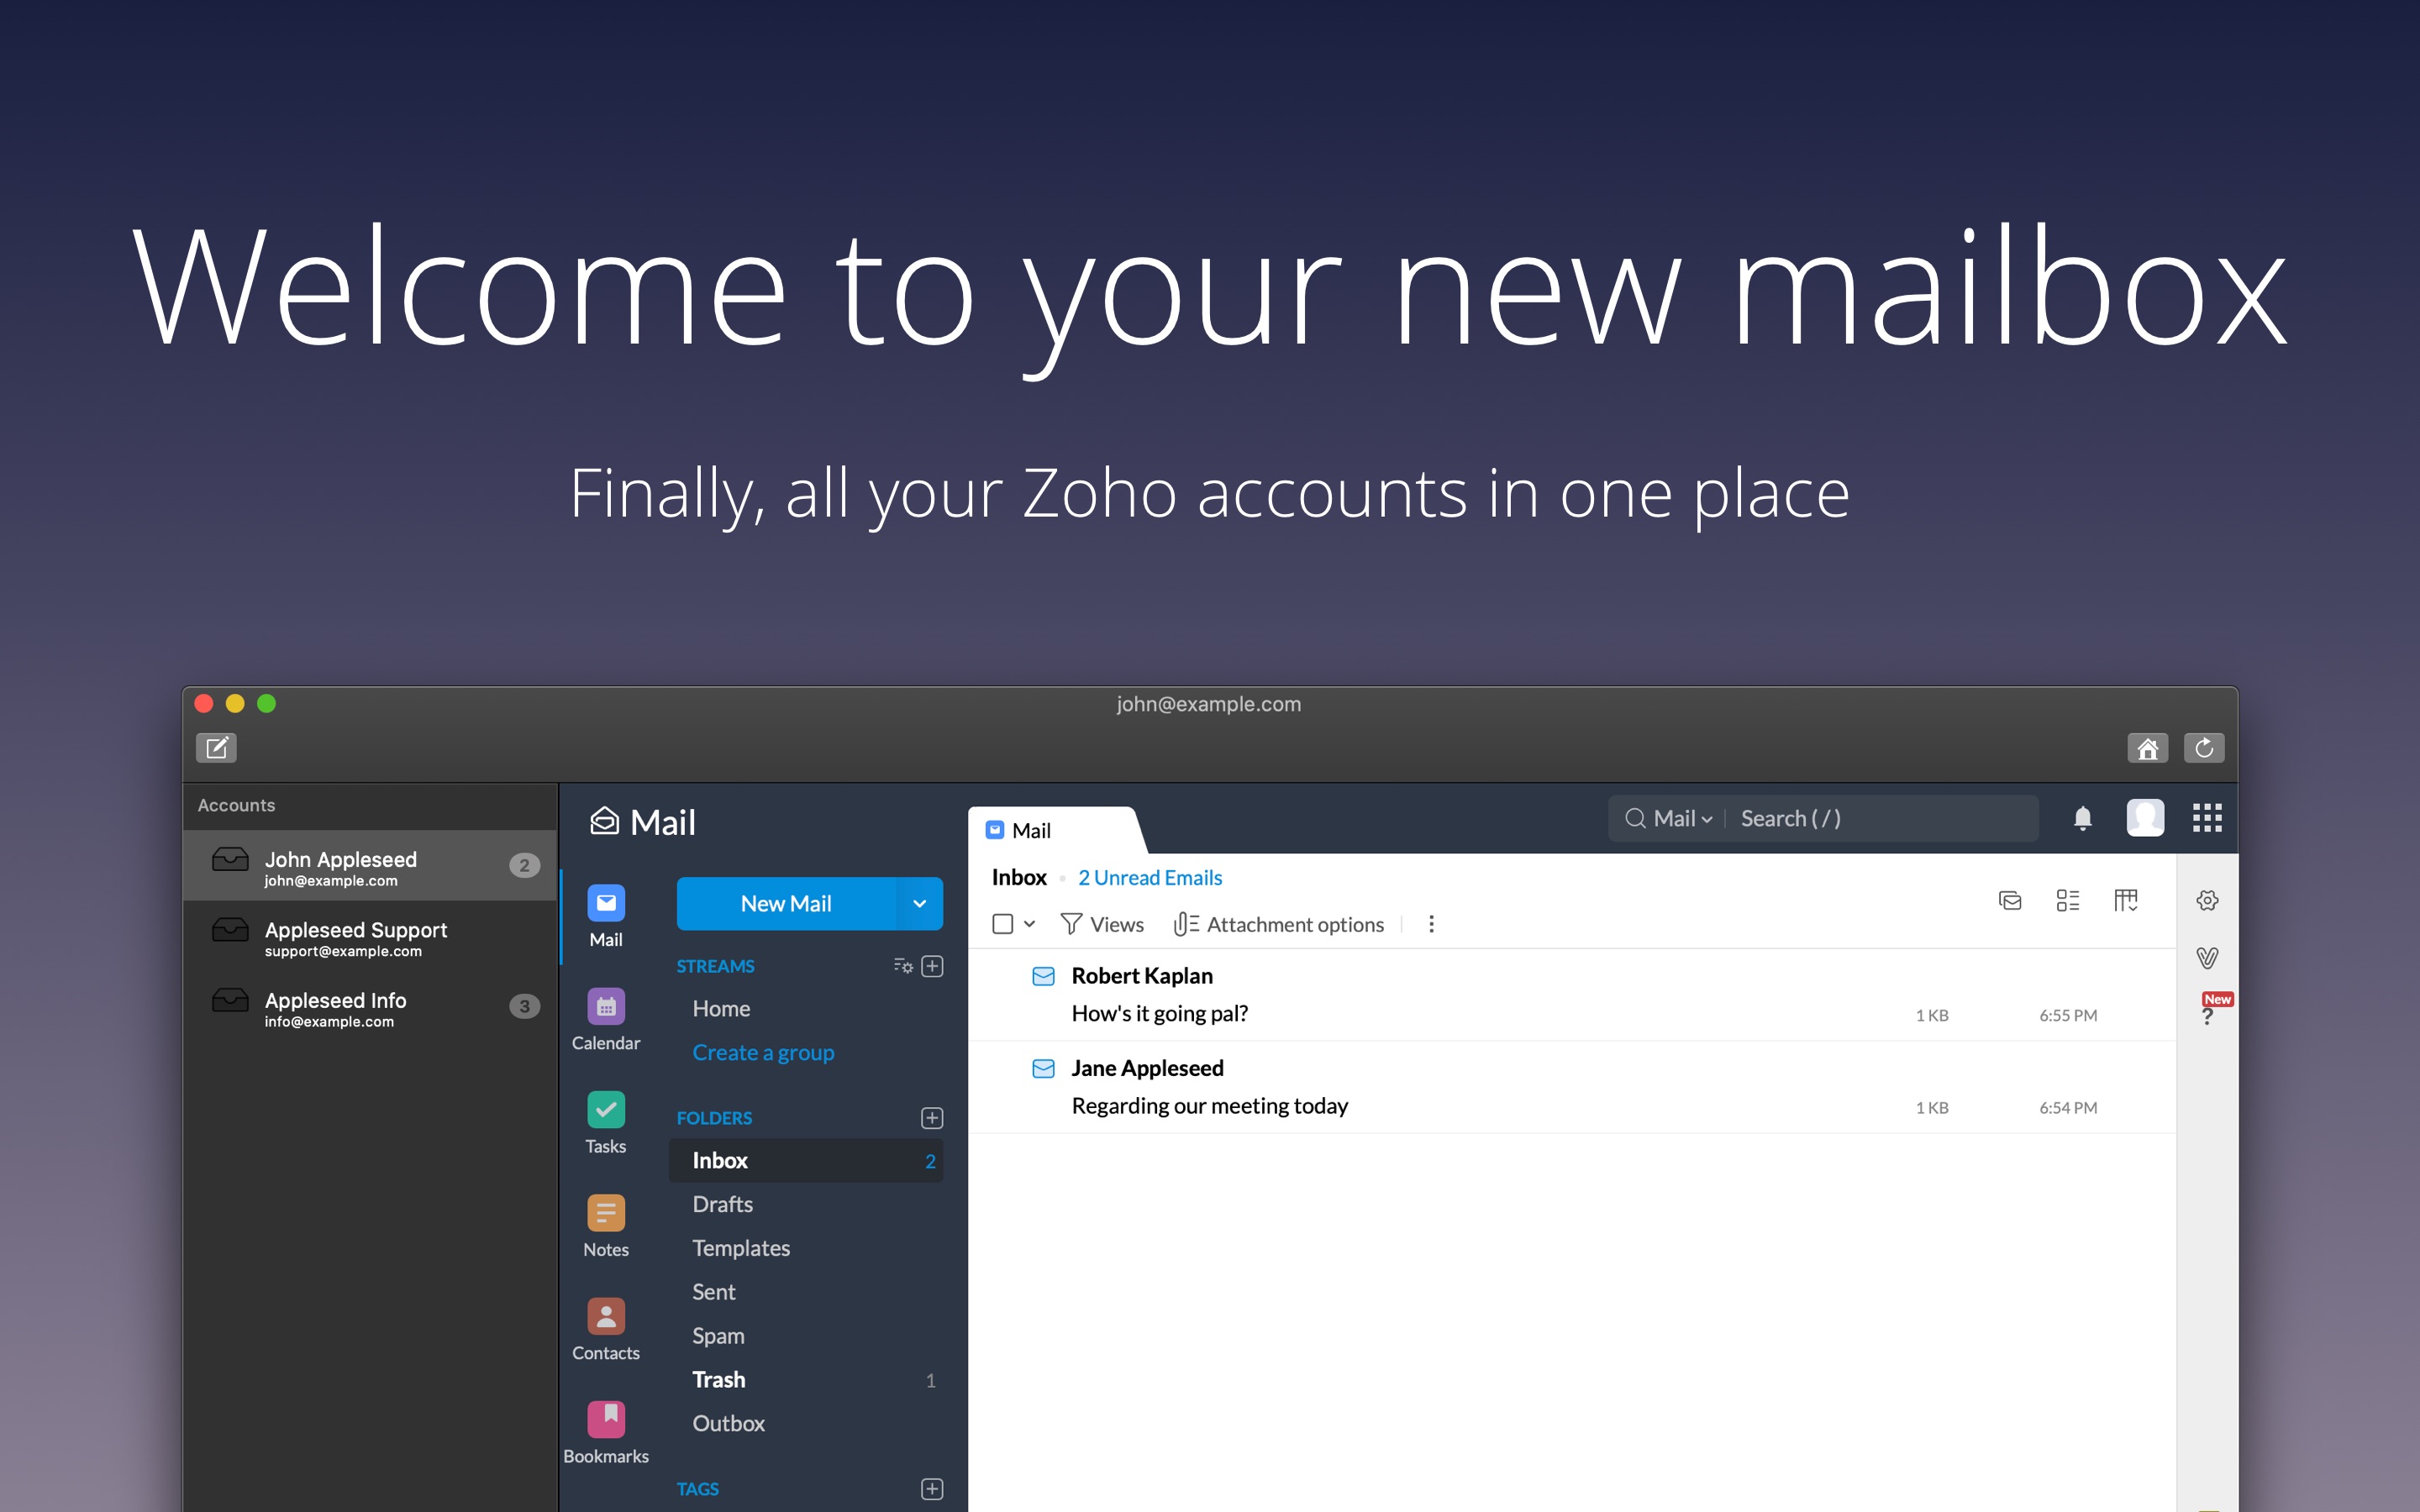 all your Zoho accounts in one place; multi-accounts supported.